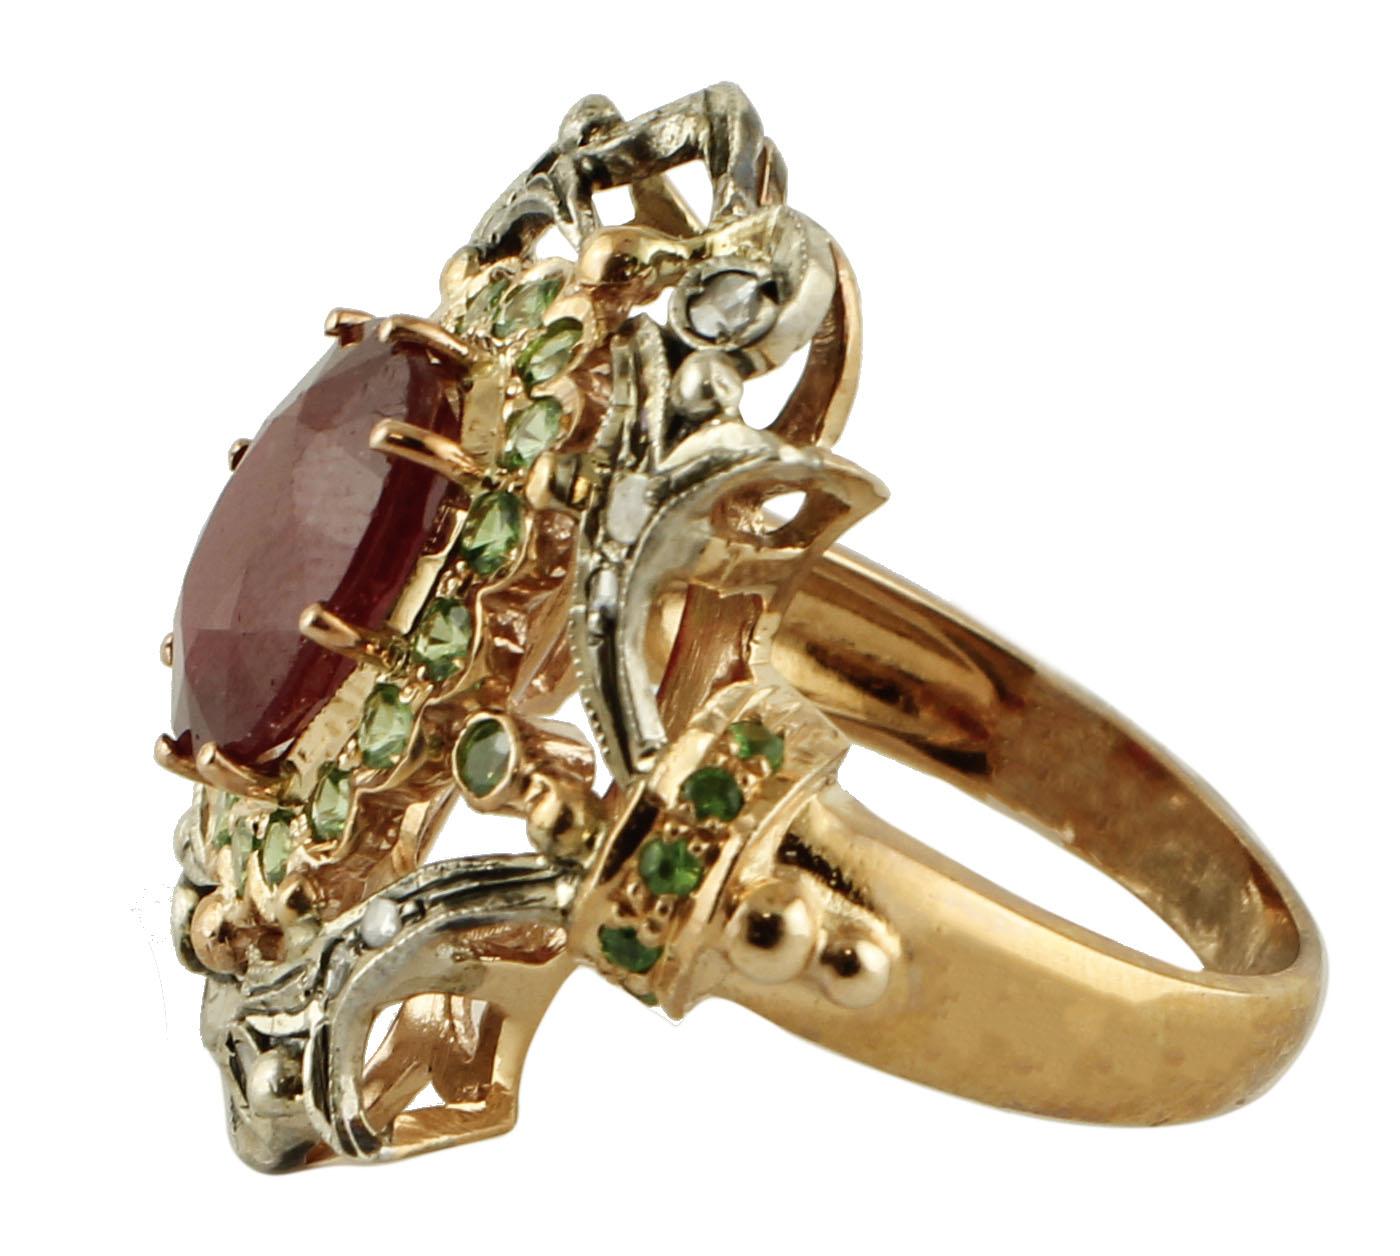 Wonderful retro ring in 9k rose gold and silver structure, mounted with a central intense ruby surrounded by a rose gold crown studded with tsavorite and silver details studded with diamonds all around.
The origin of this ring goes back to 1960s. It